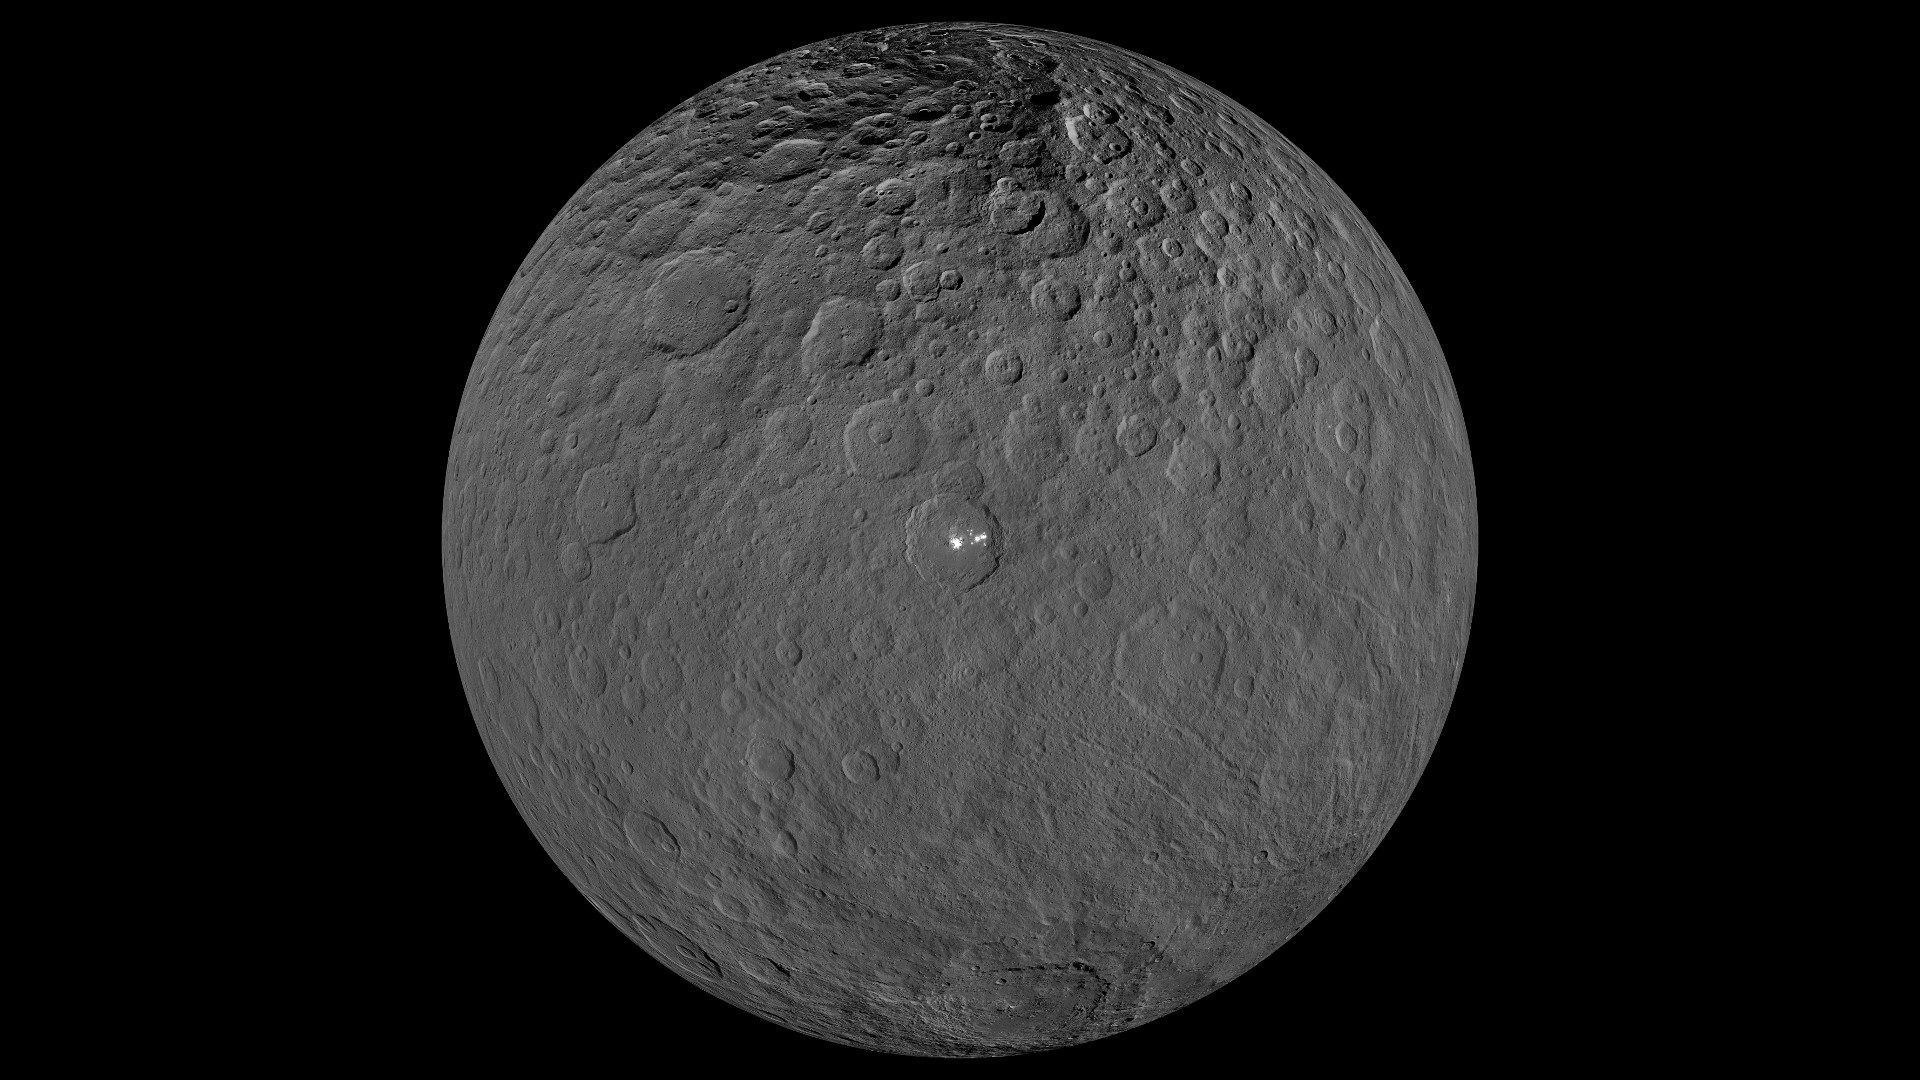 An orthographic projection from NASA's Dawn spacecraft showing the dwarf planet Ceres.  It focuses on the brightest area on Ceres, the Occator Crater.